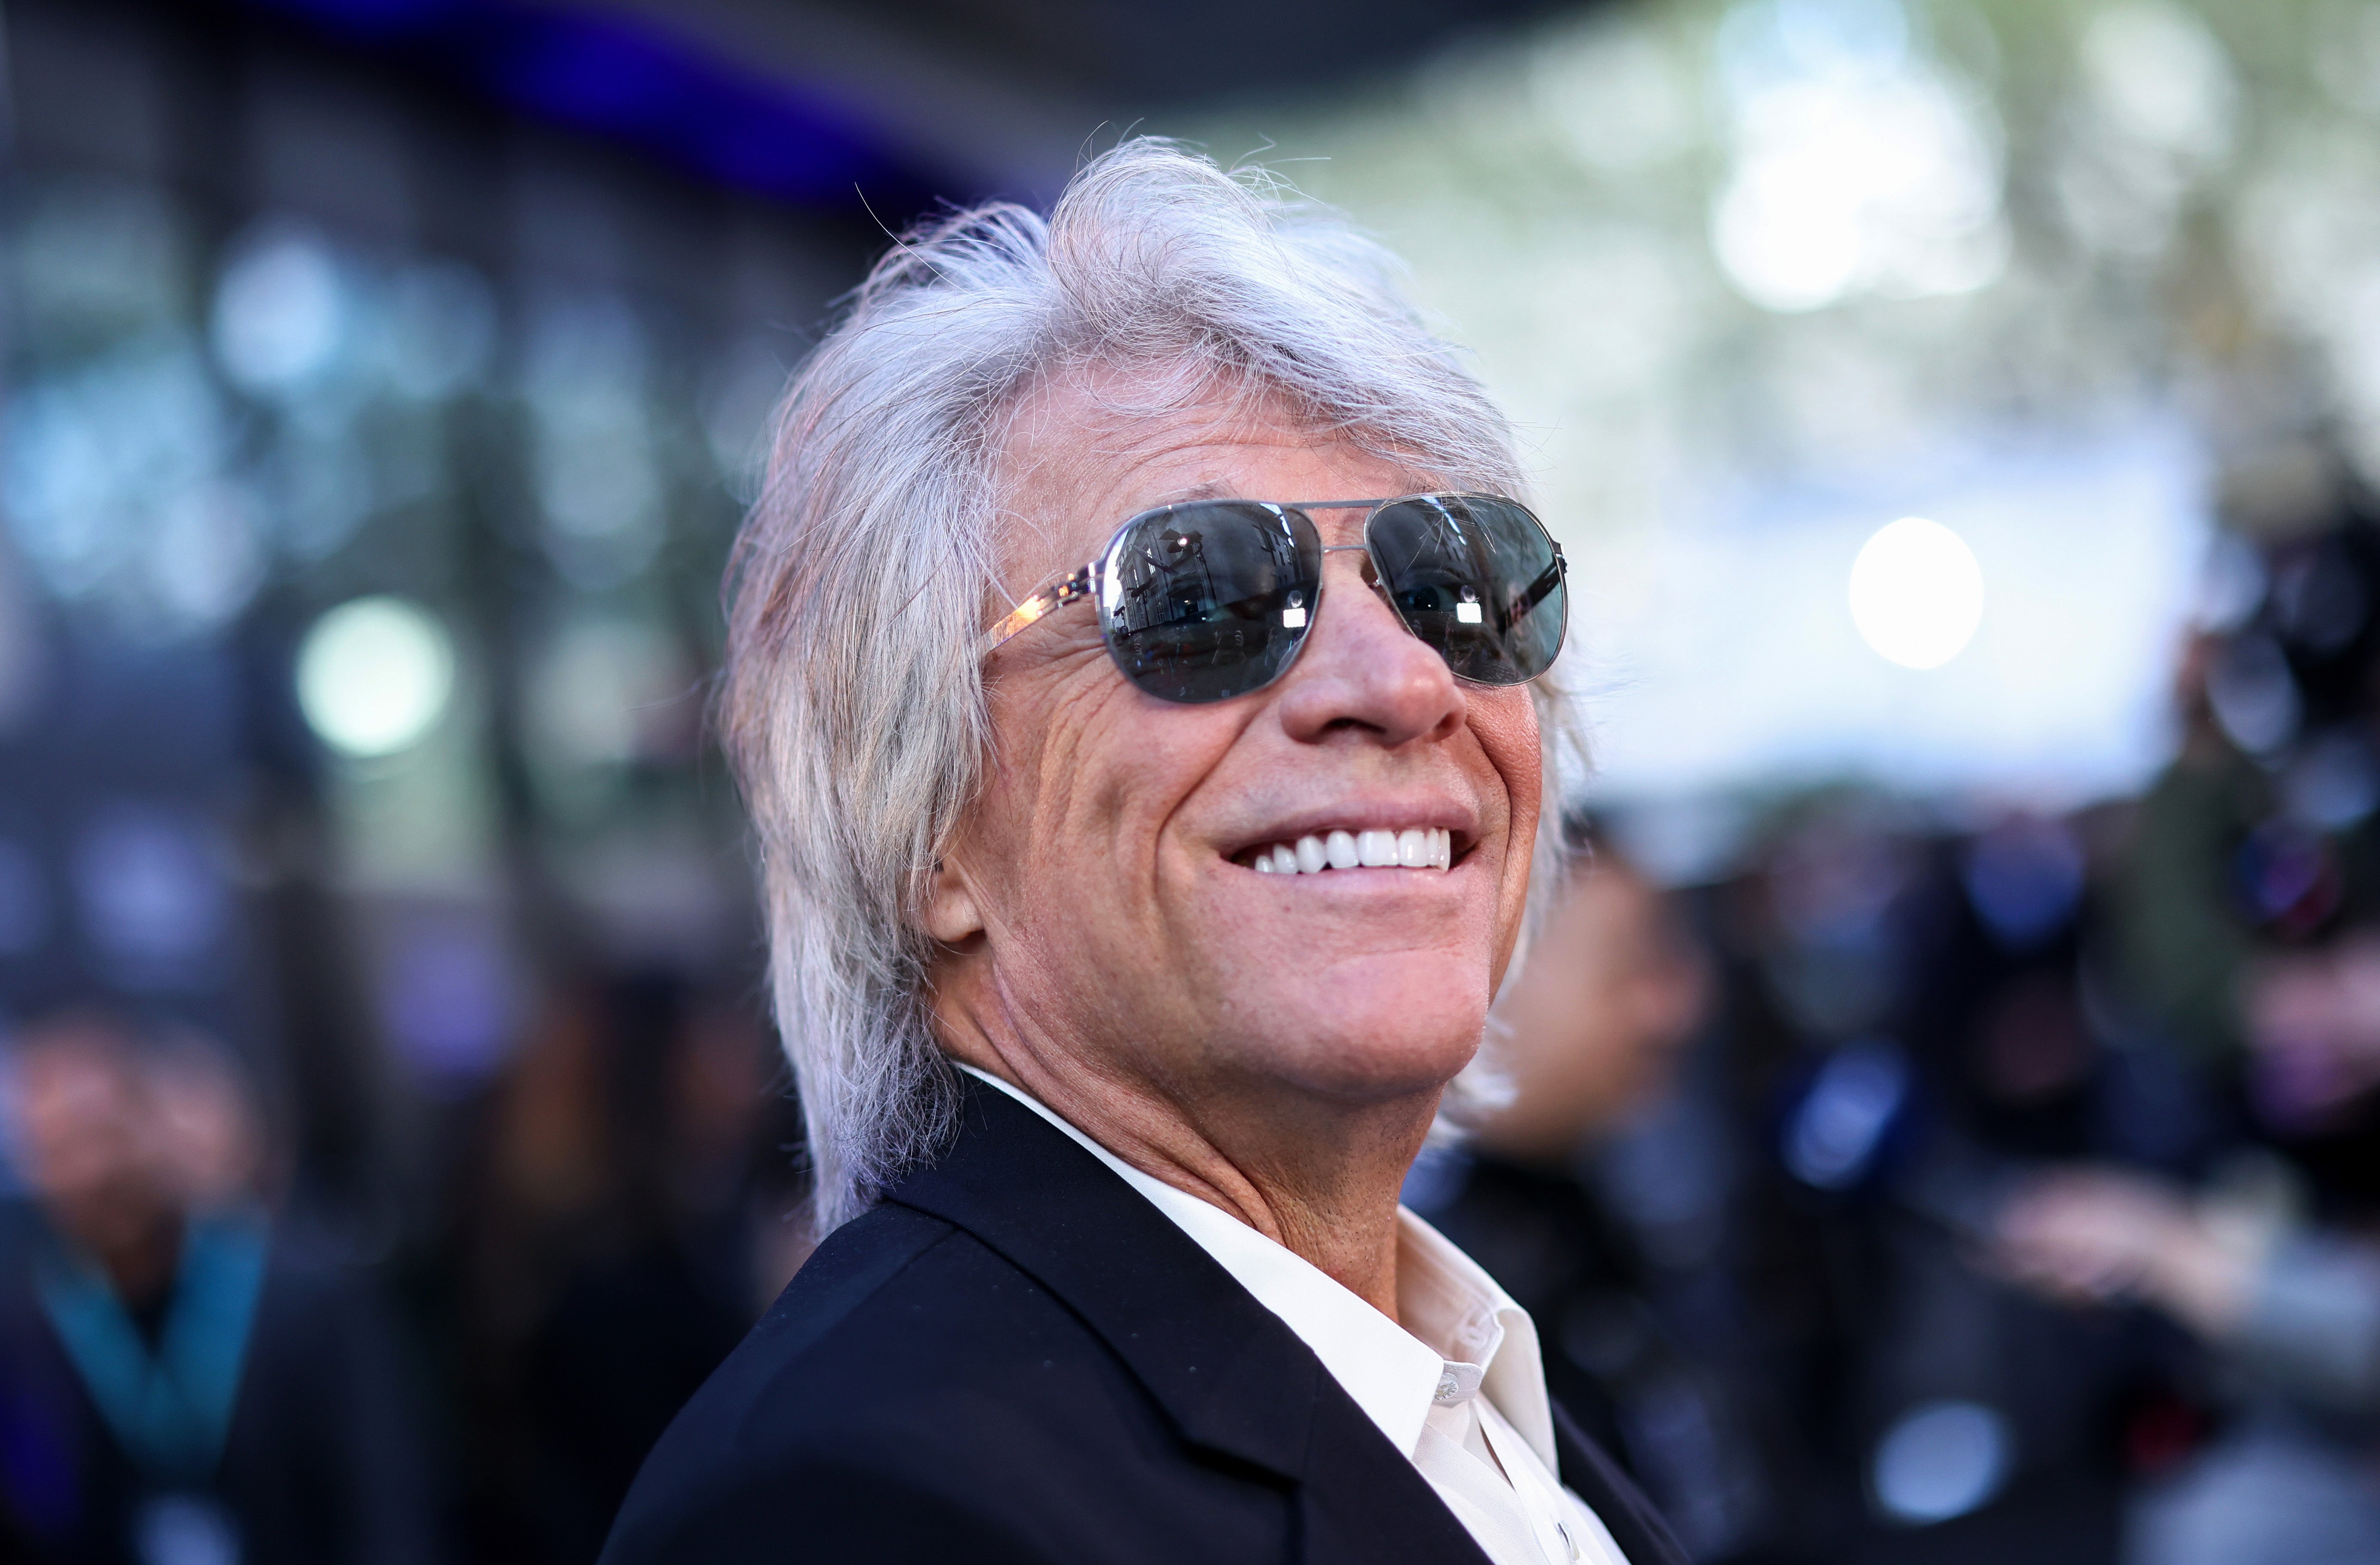 Jon Bon Jovi: ‘[Am I] ready to do two and a half hours at Wembley? Probably not yet’